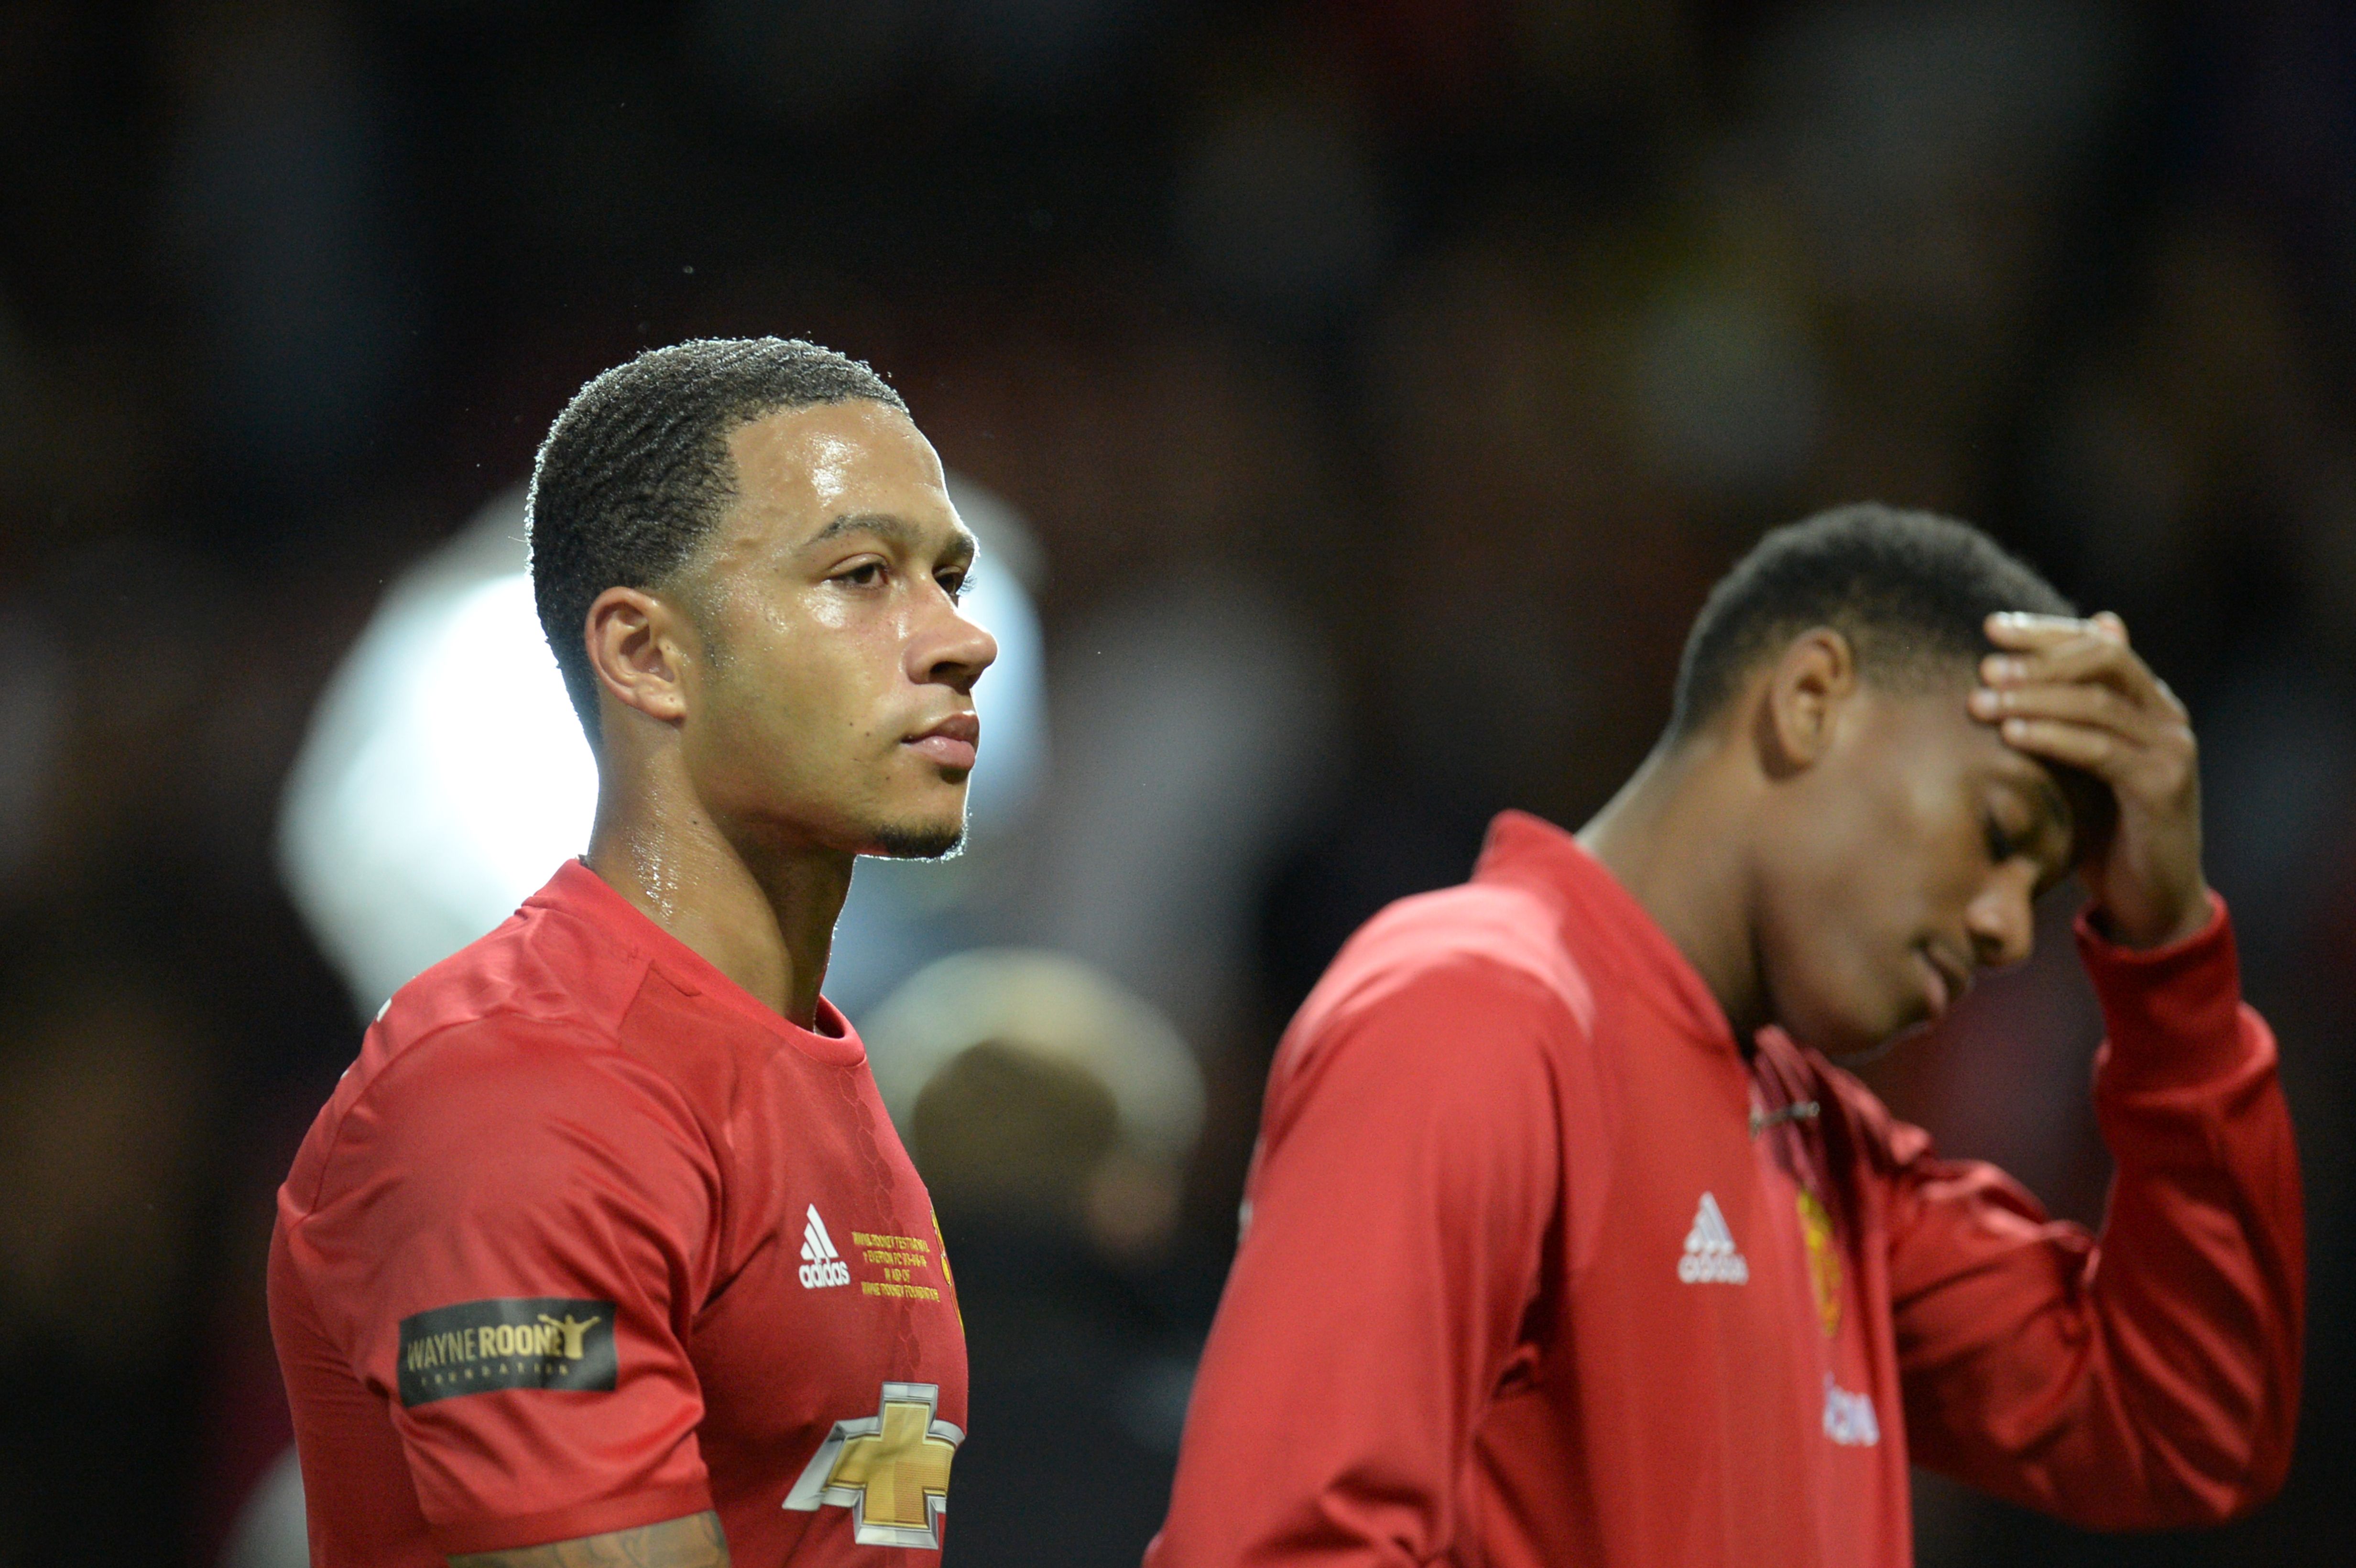 Manchester United's Dutch midfielder Memphis Depay (L) and Manchester United's French striker Anthony Martial (R) leave the pitch at the end of the friendly Wayne Rooney testimonial football match between Manchester United and Everton at Old Trafford in Manchester, northwest England, on August 3, 2016.  / AFP / OLI SCARFF        (Photo credit should read OLI SCARFF/AFP/Getty Images)